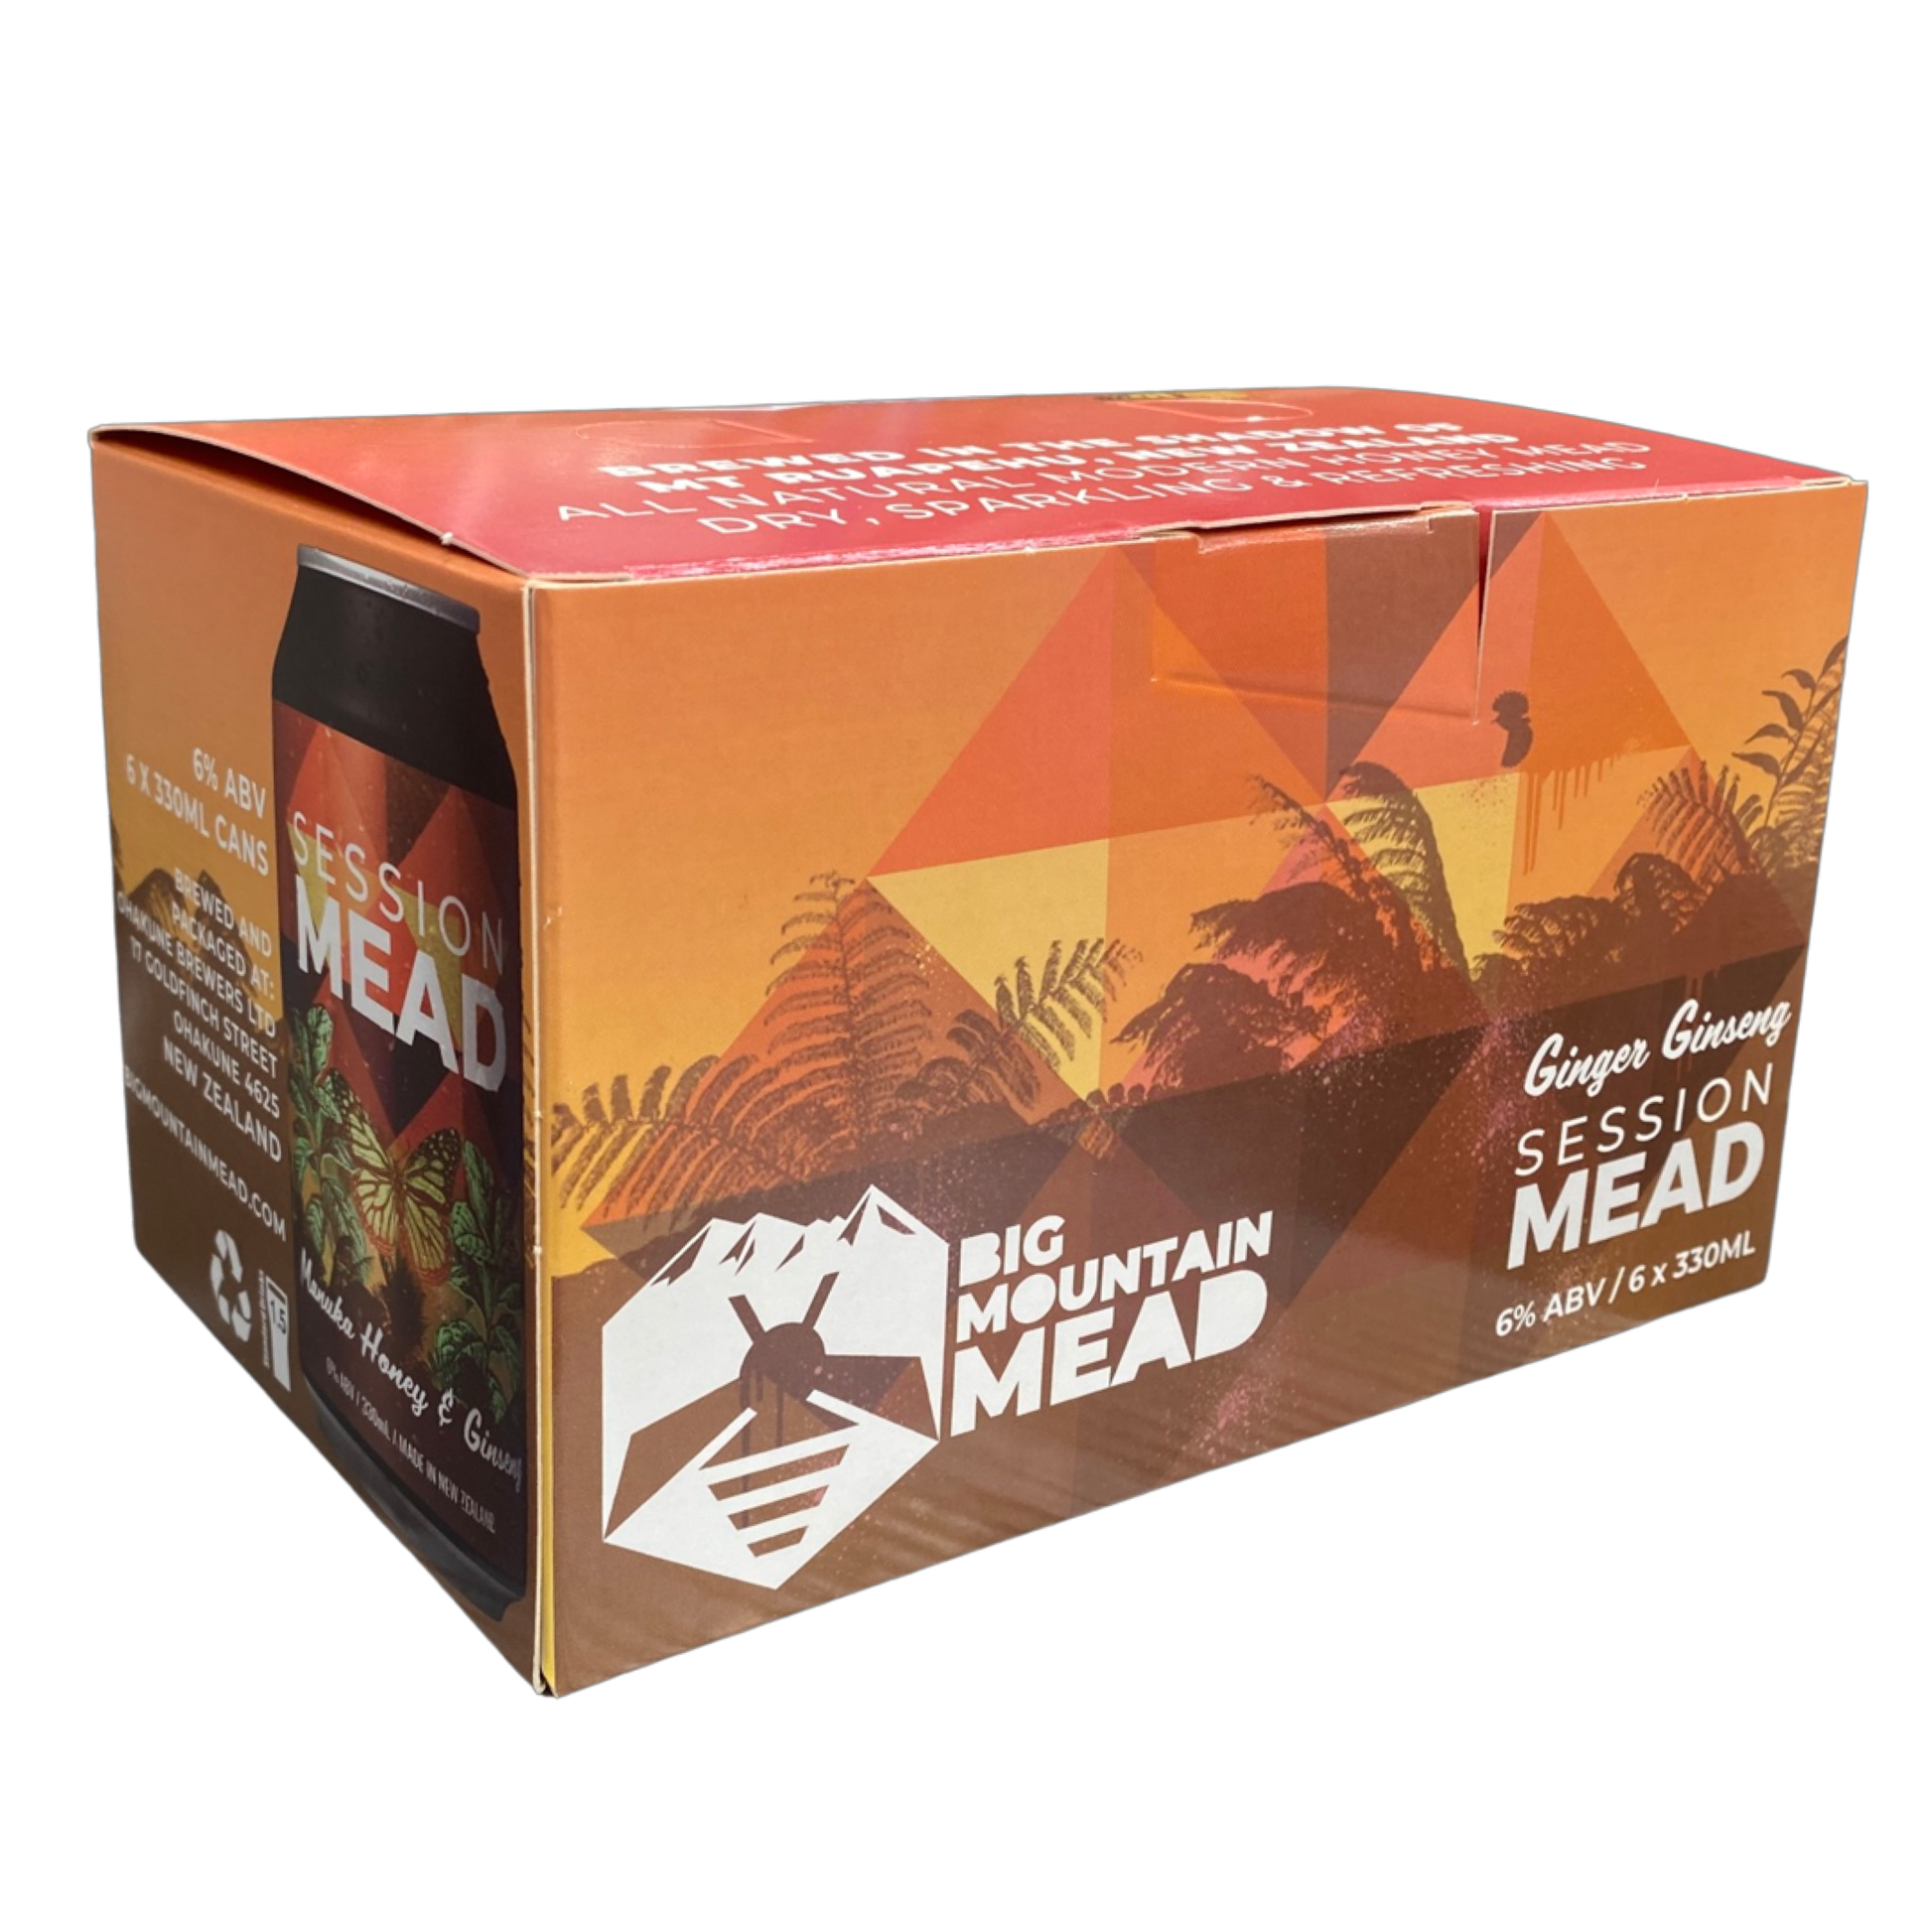 Ginger Ginseng Mead Retail 6-pack 330ml cans - Big Mountain Mead